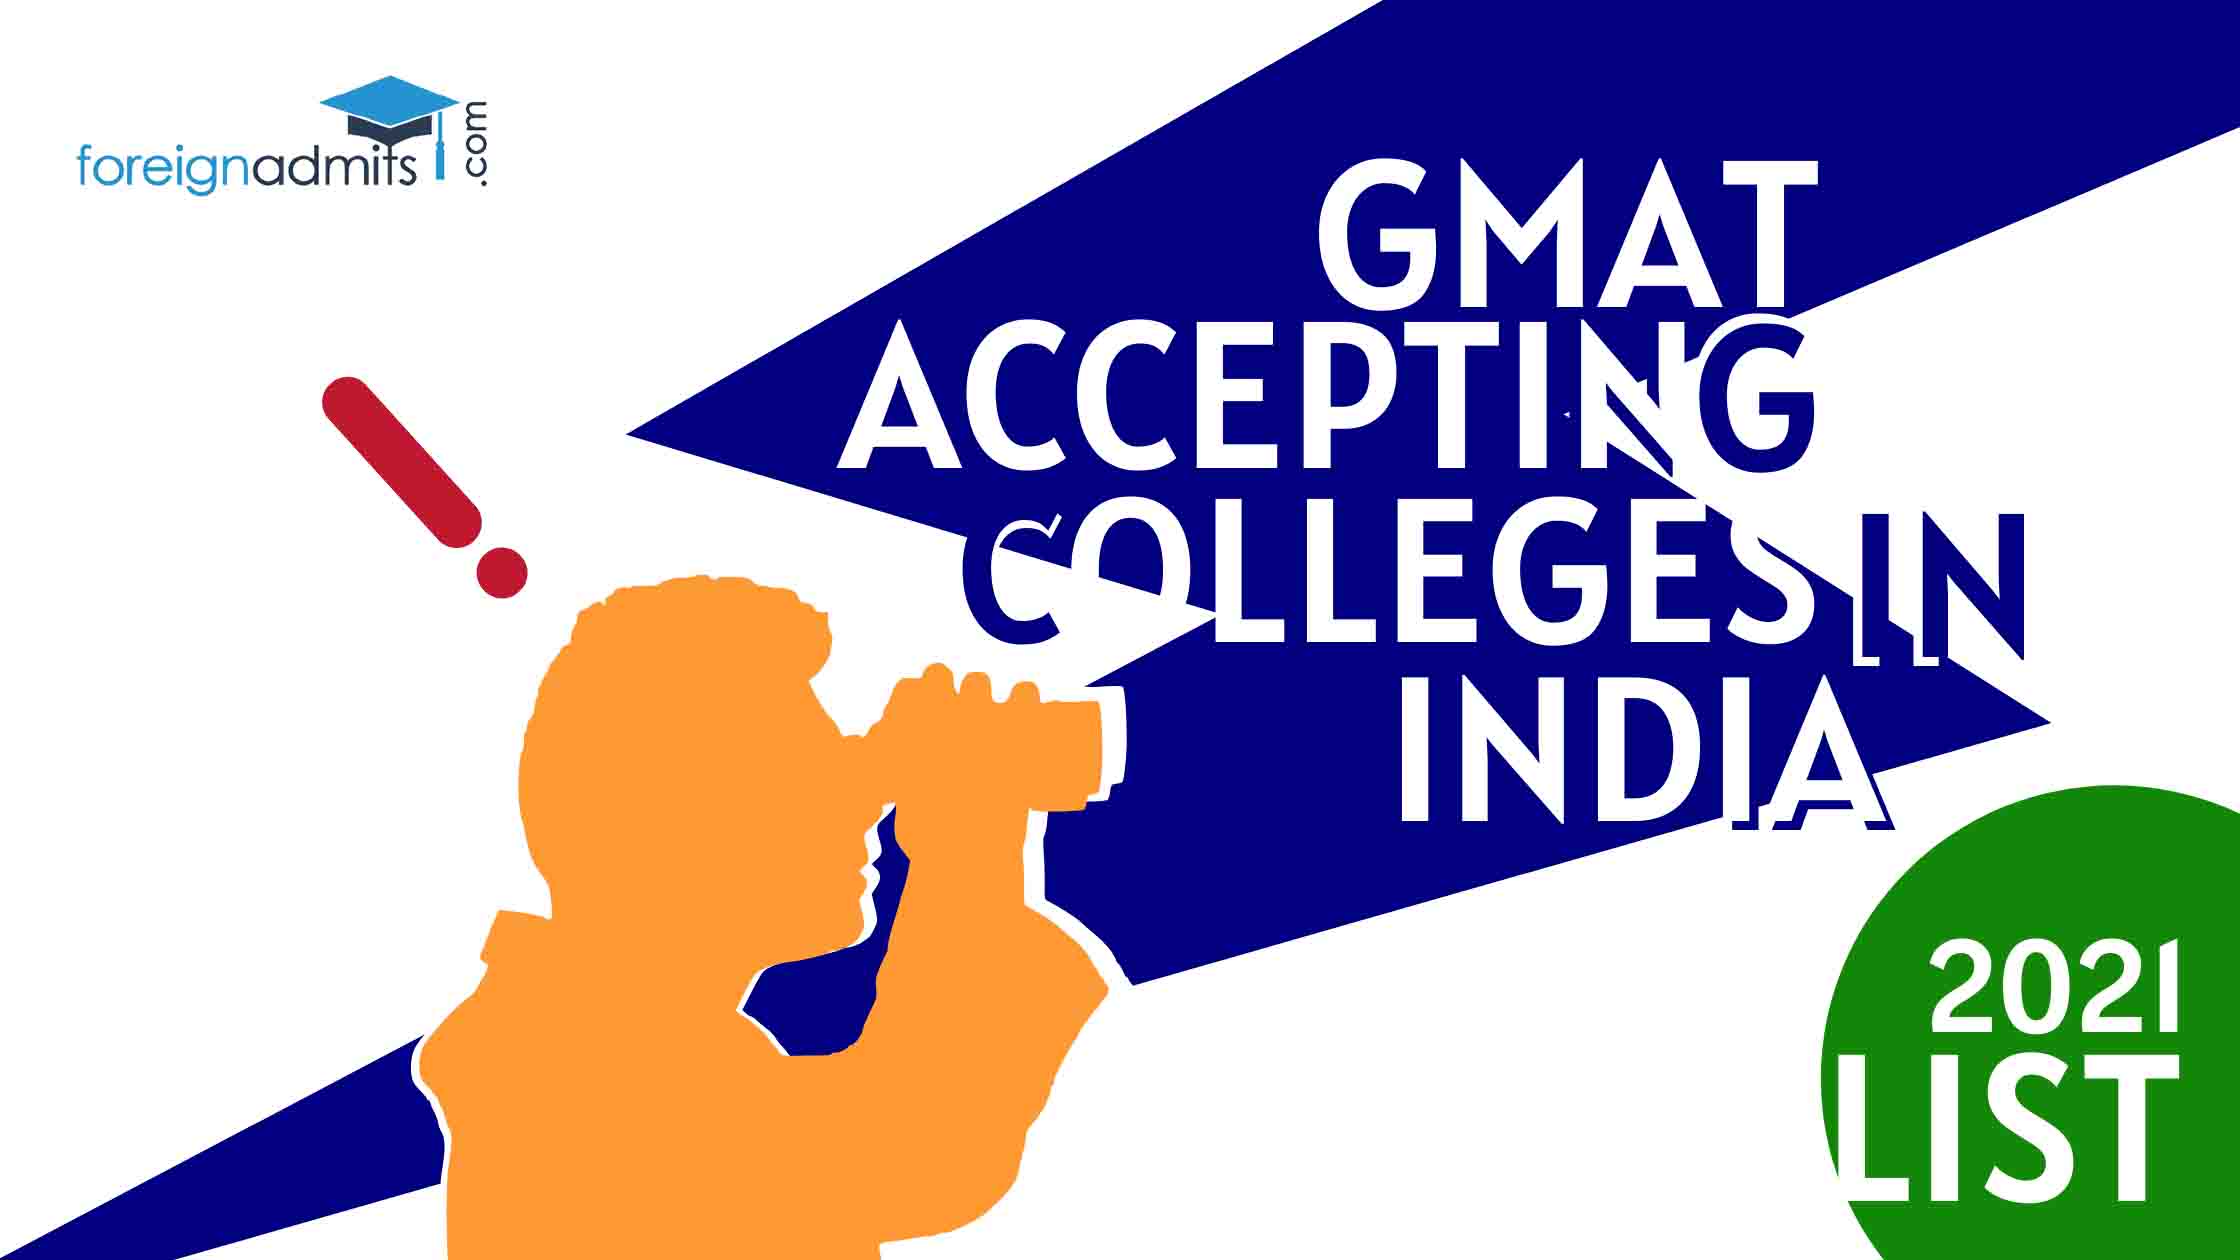 GMAT Accepting Colleges in India [2021 List]